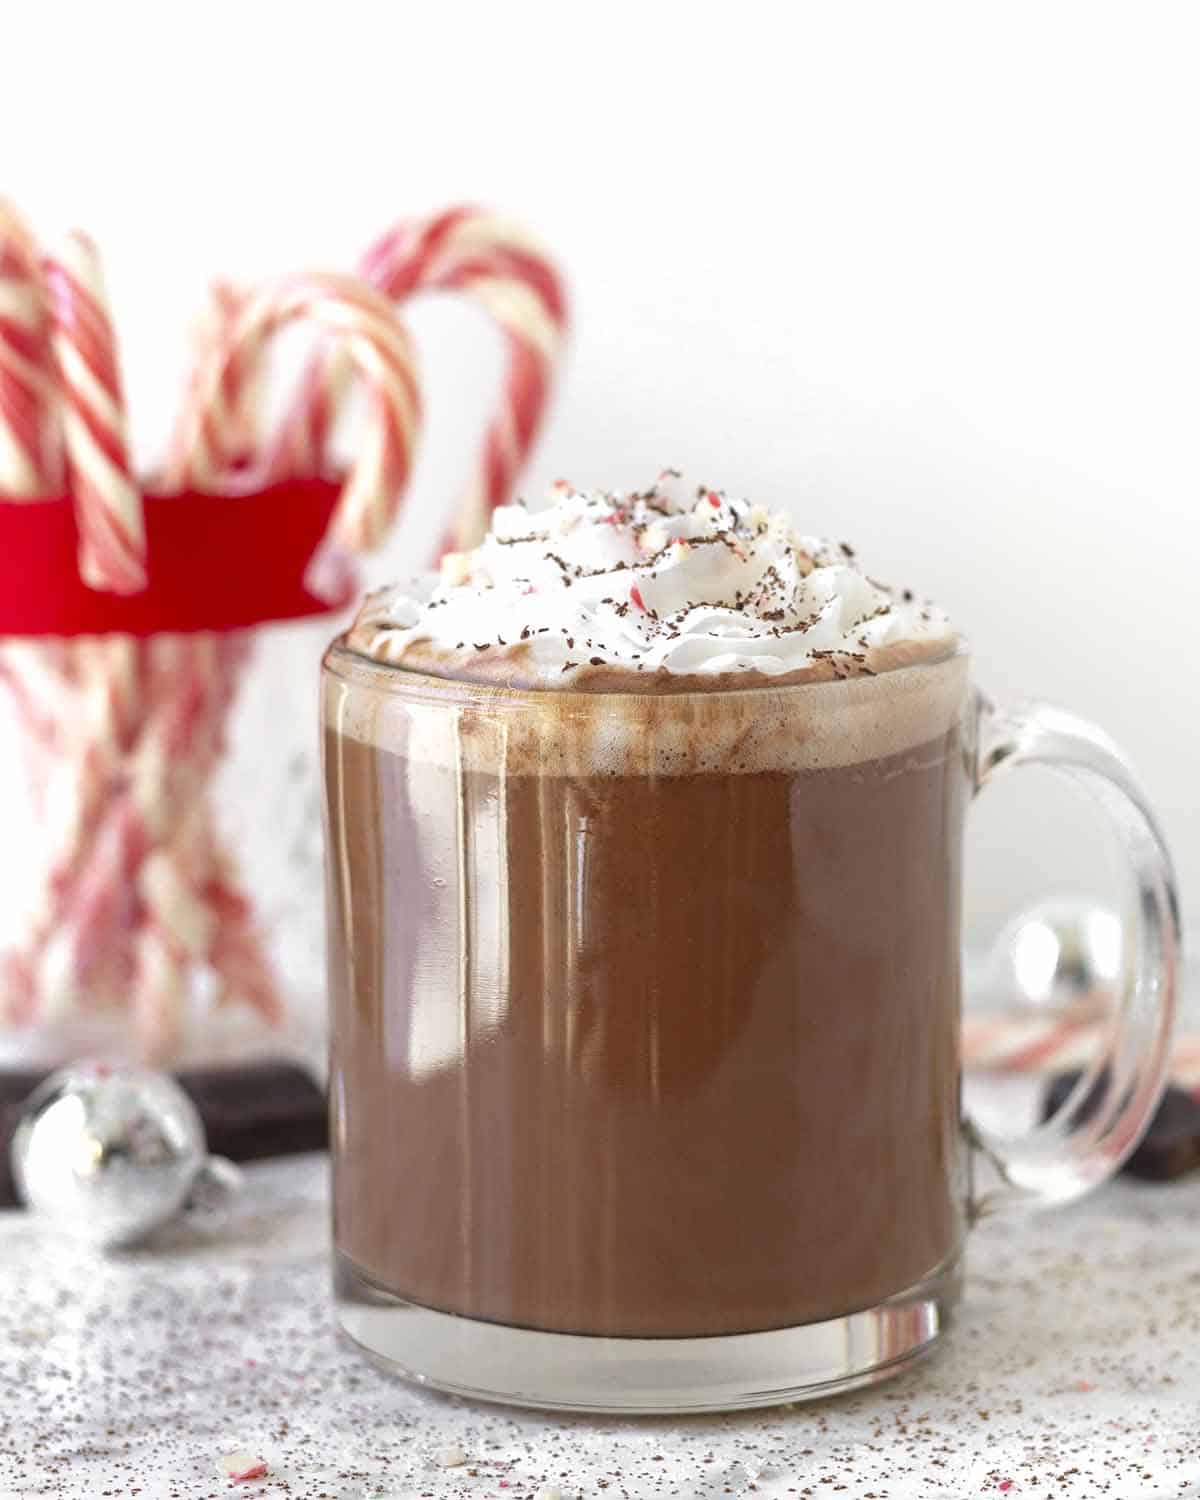 A mug filled with peppermint mocha, the drink is garnished with whipped cream, crushed candy canes and shaved chocolate.